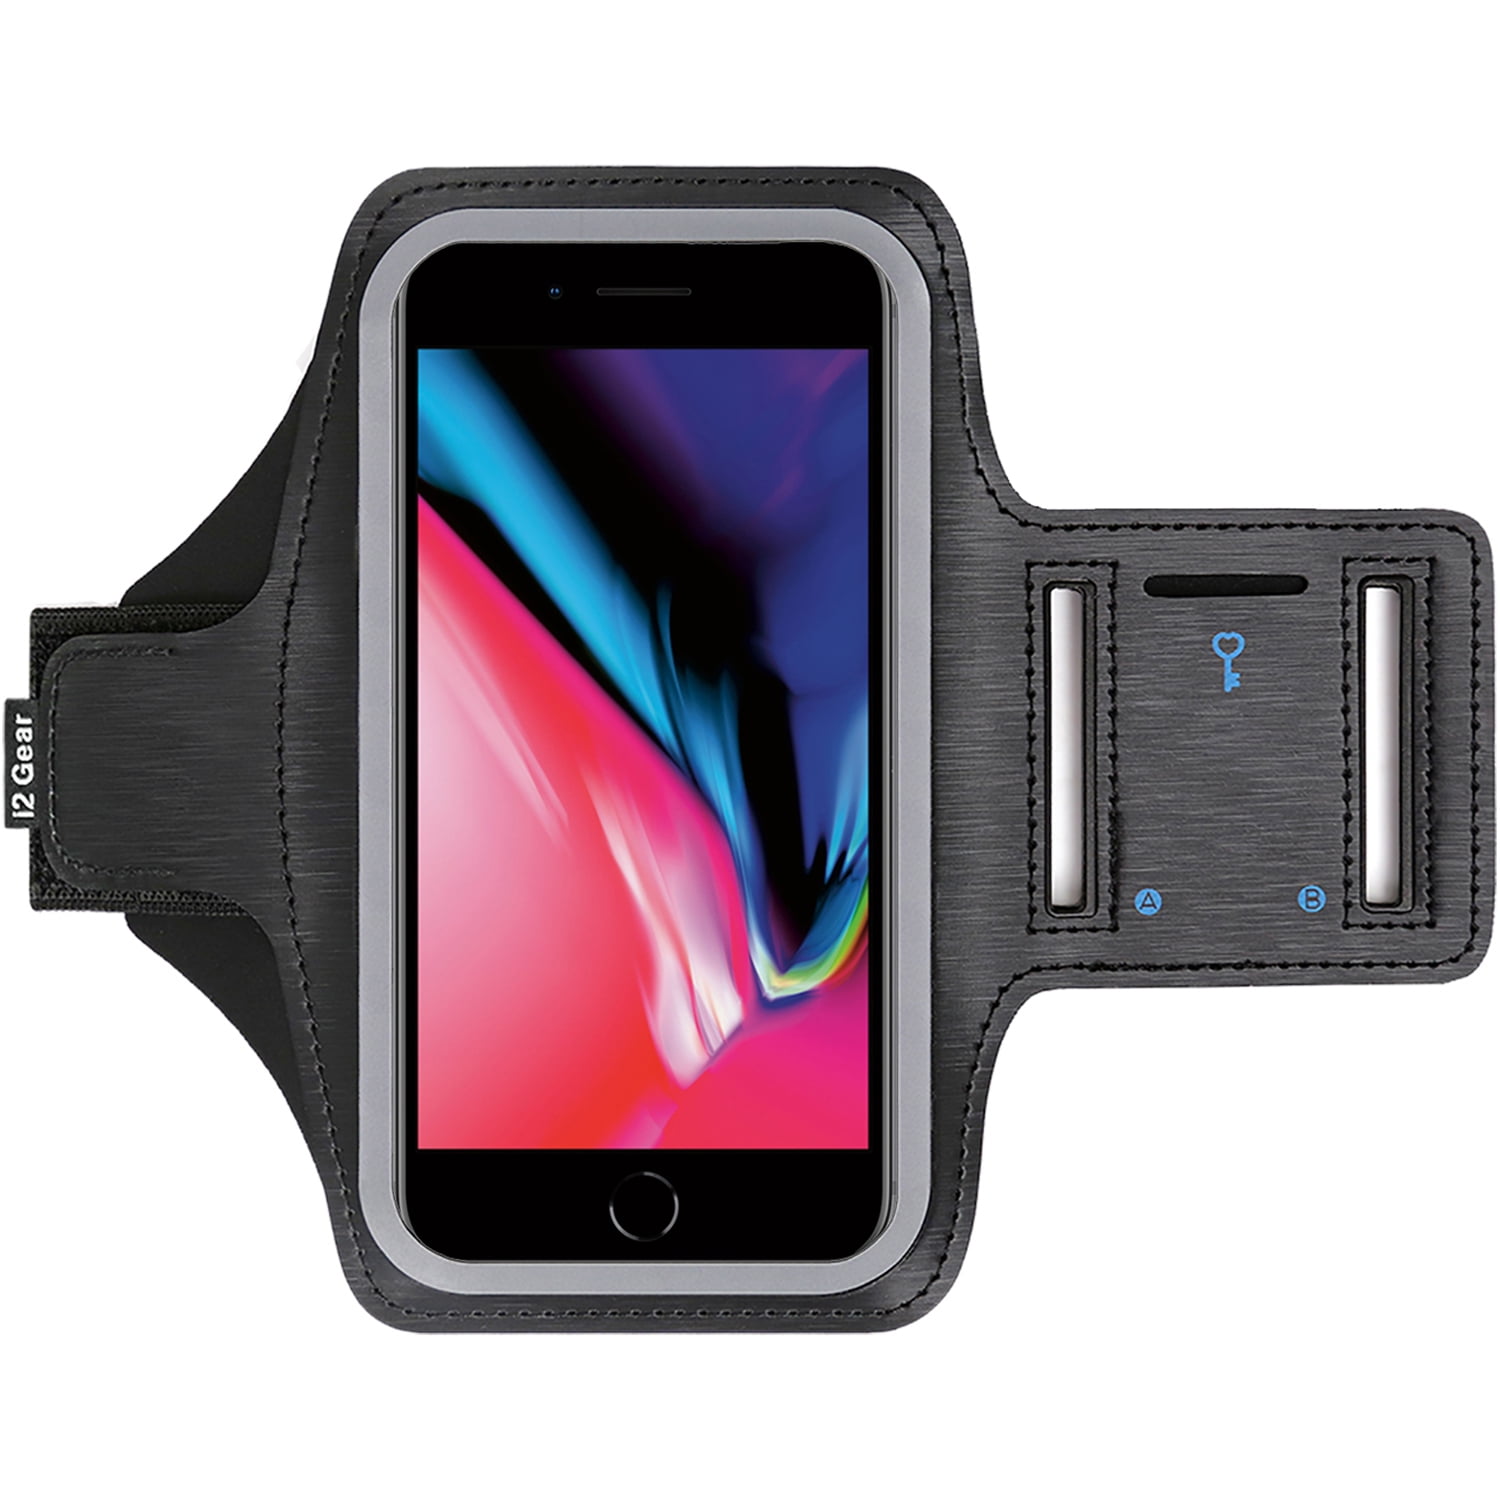 Sports Arm band Case Mobile Phone Holder Gym Runing For iPhone 7+8 X XS MAX XR 